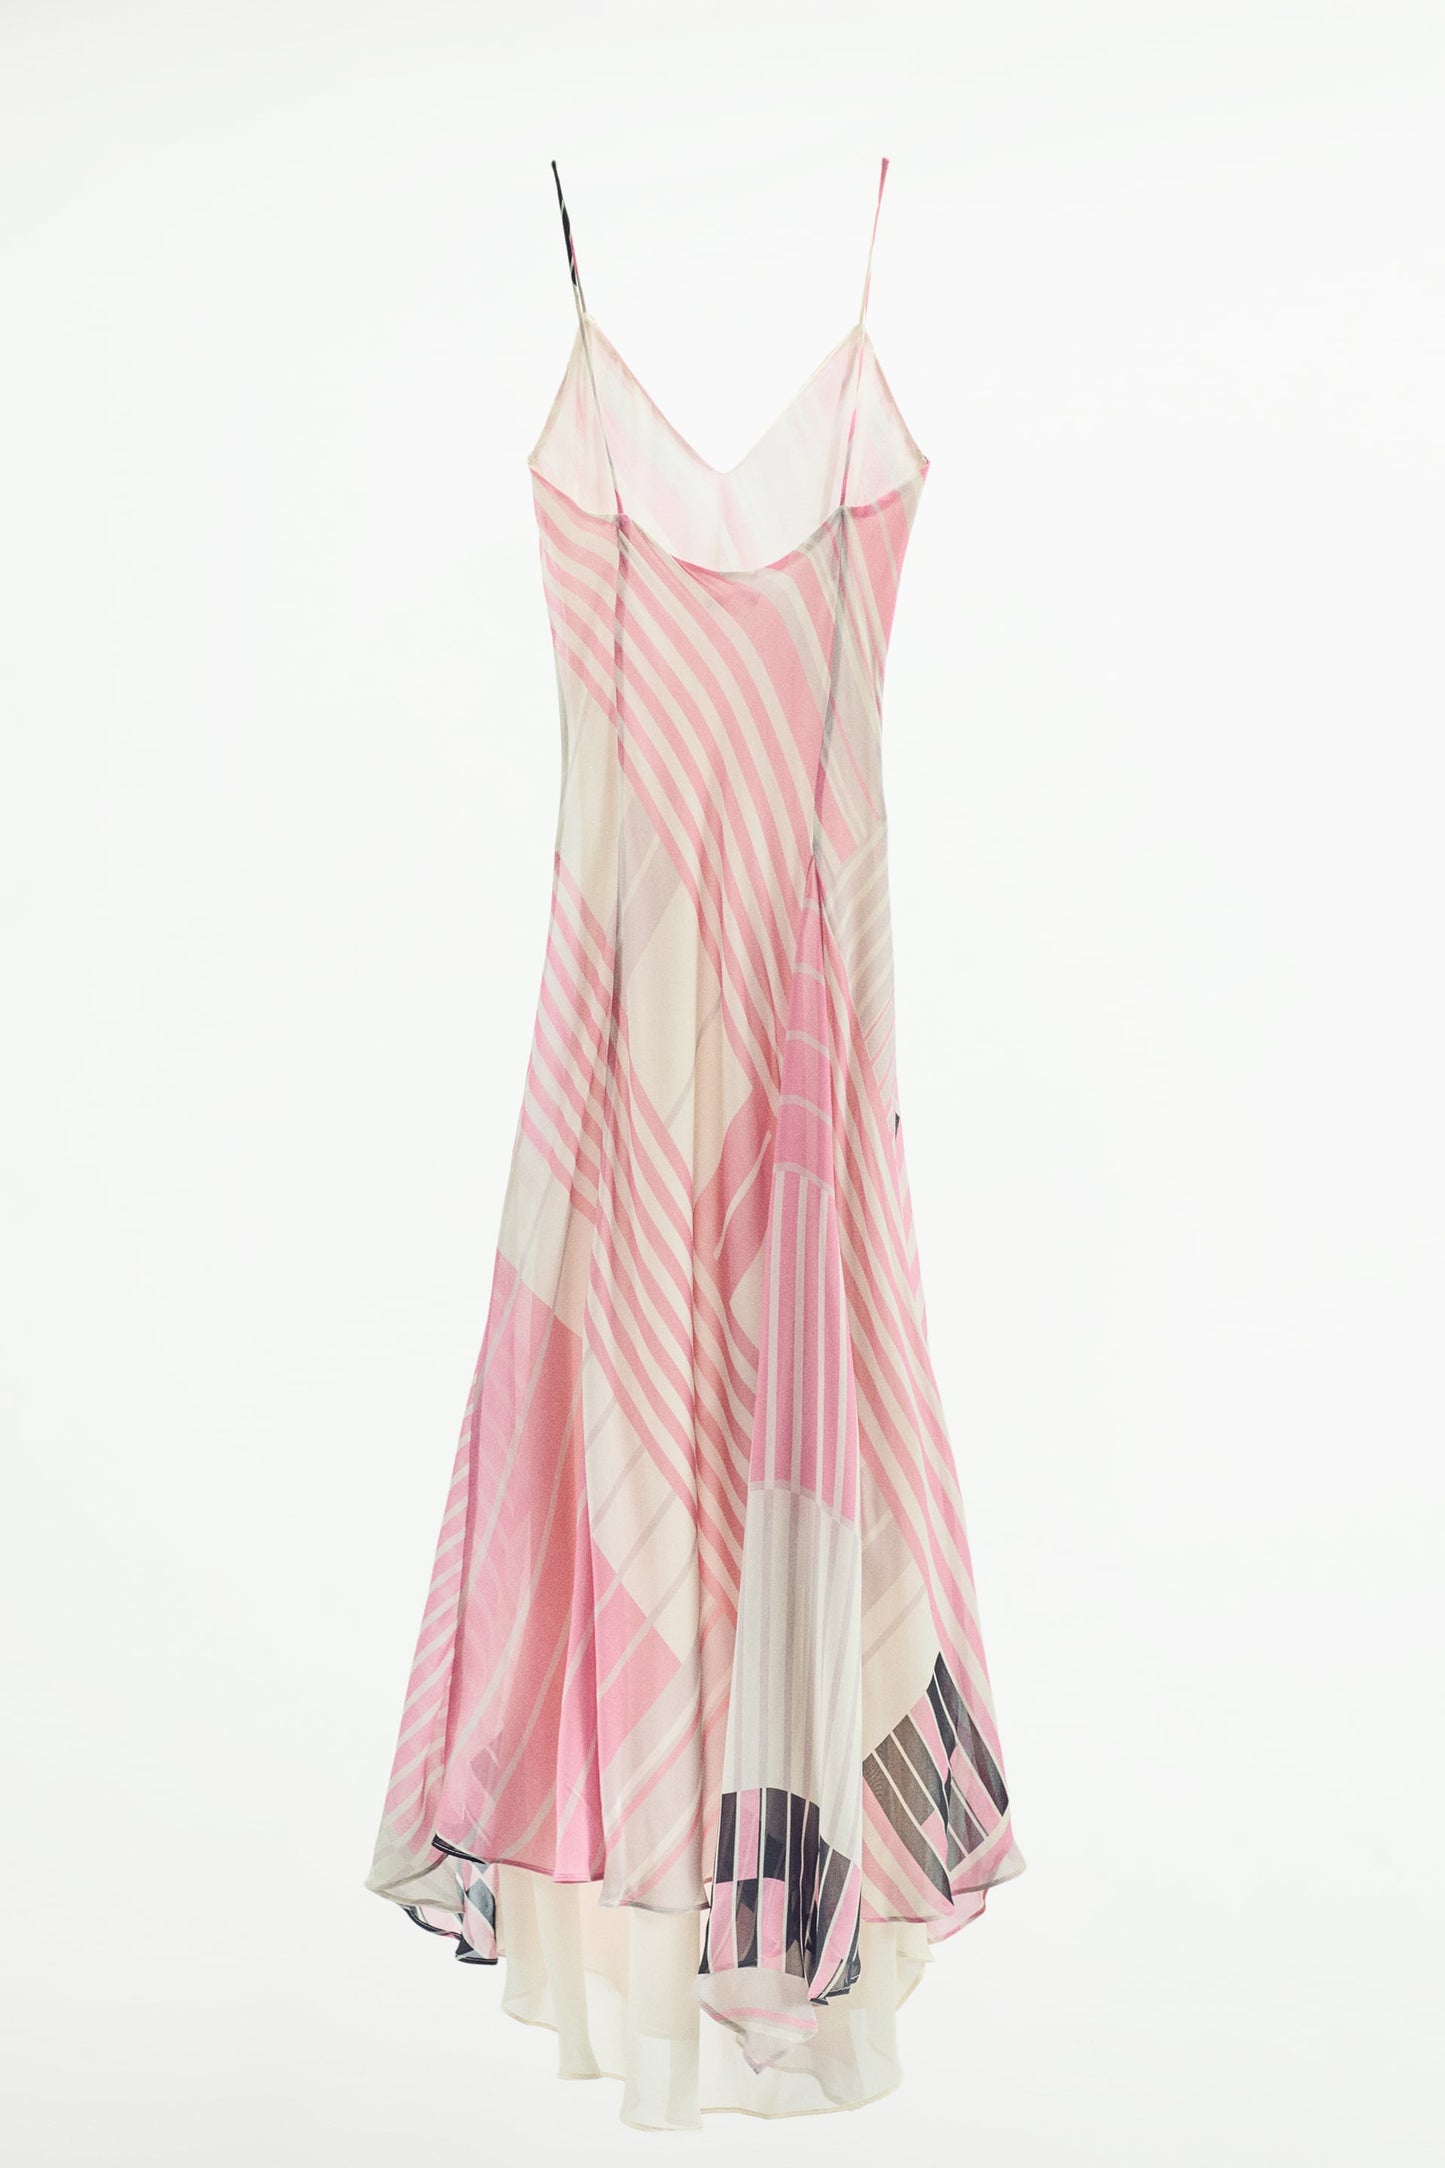 Printed camisole dress